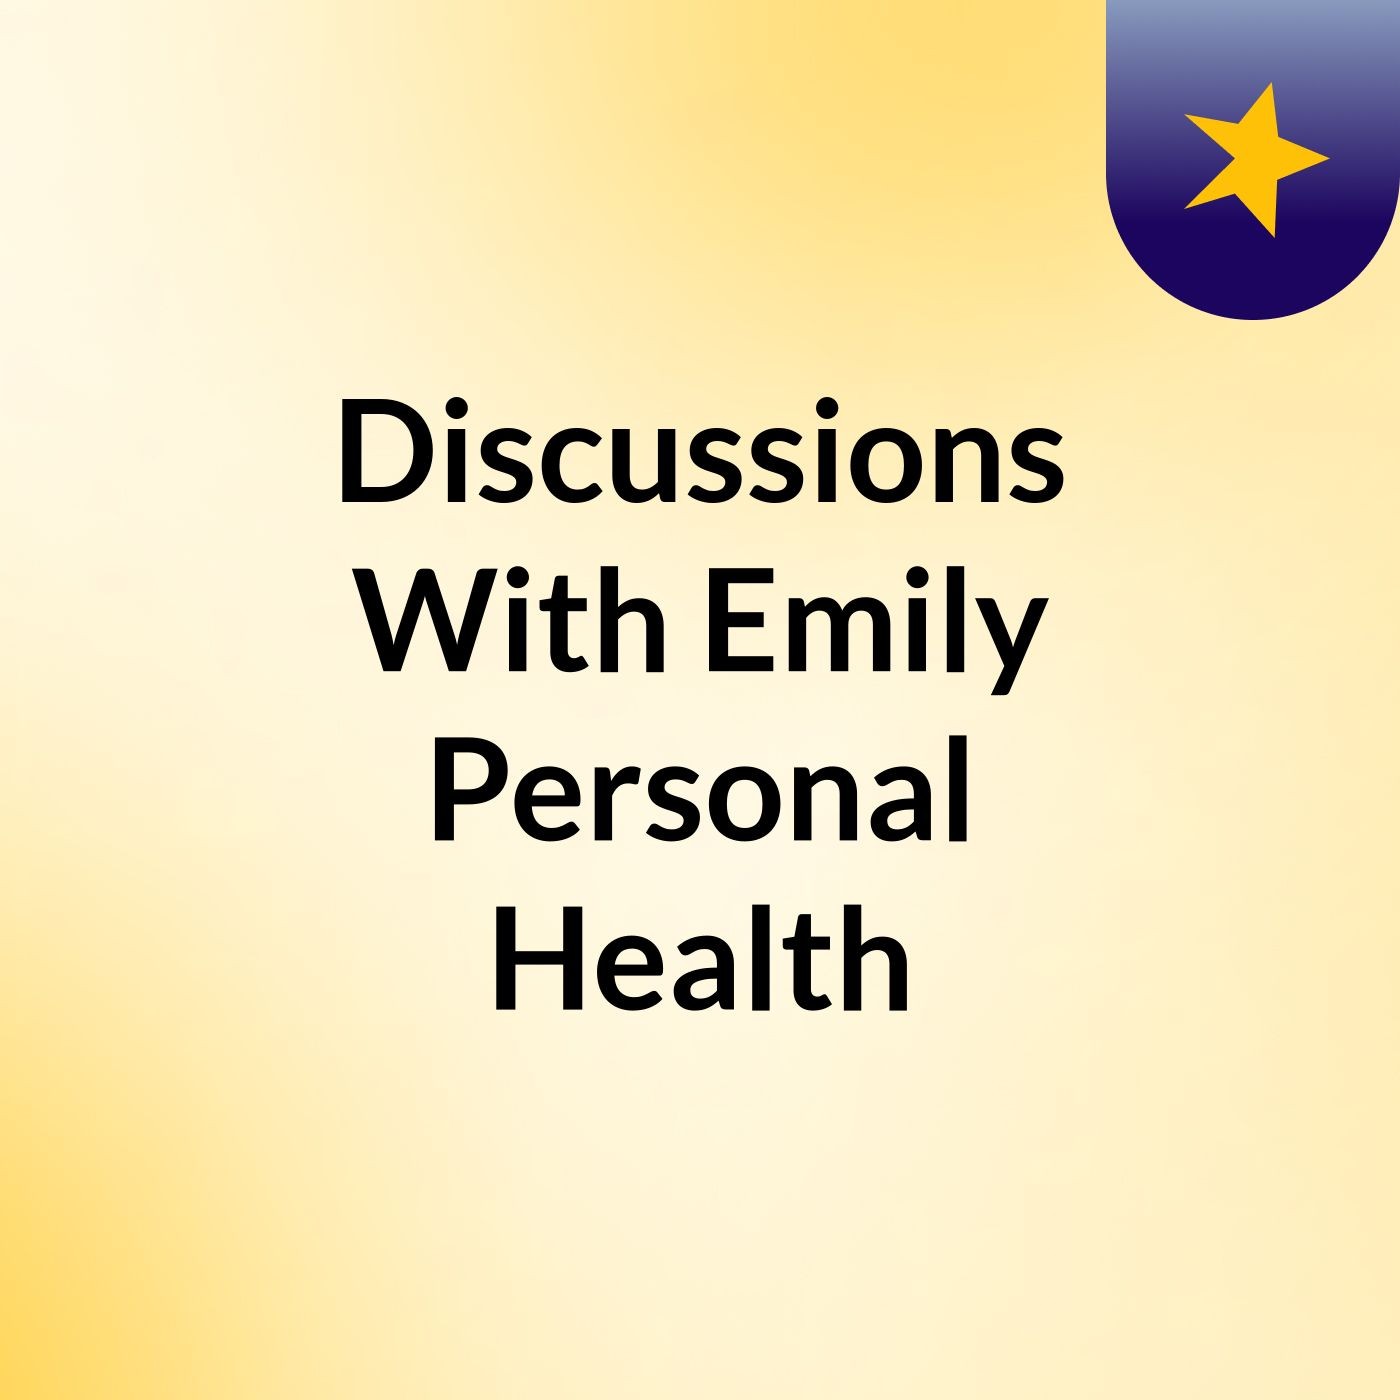 Discussions With Emily: Personal Health